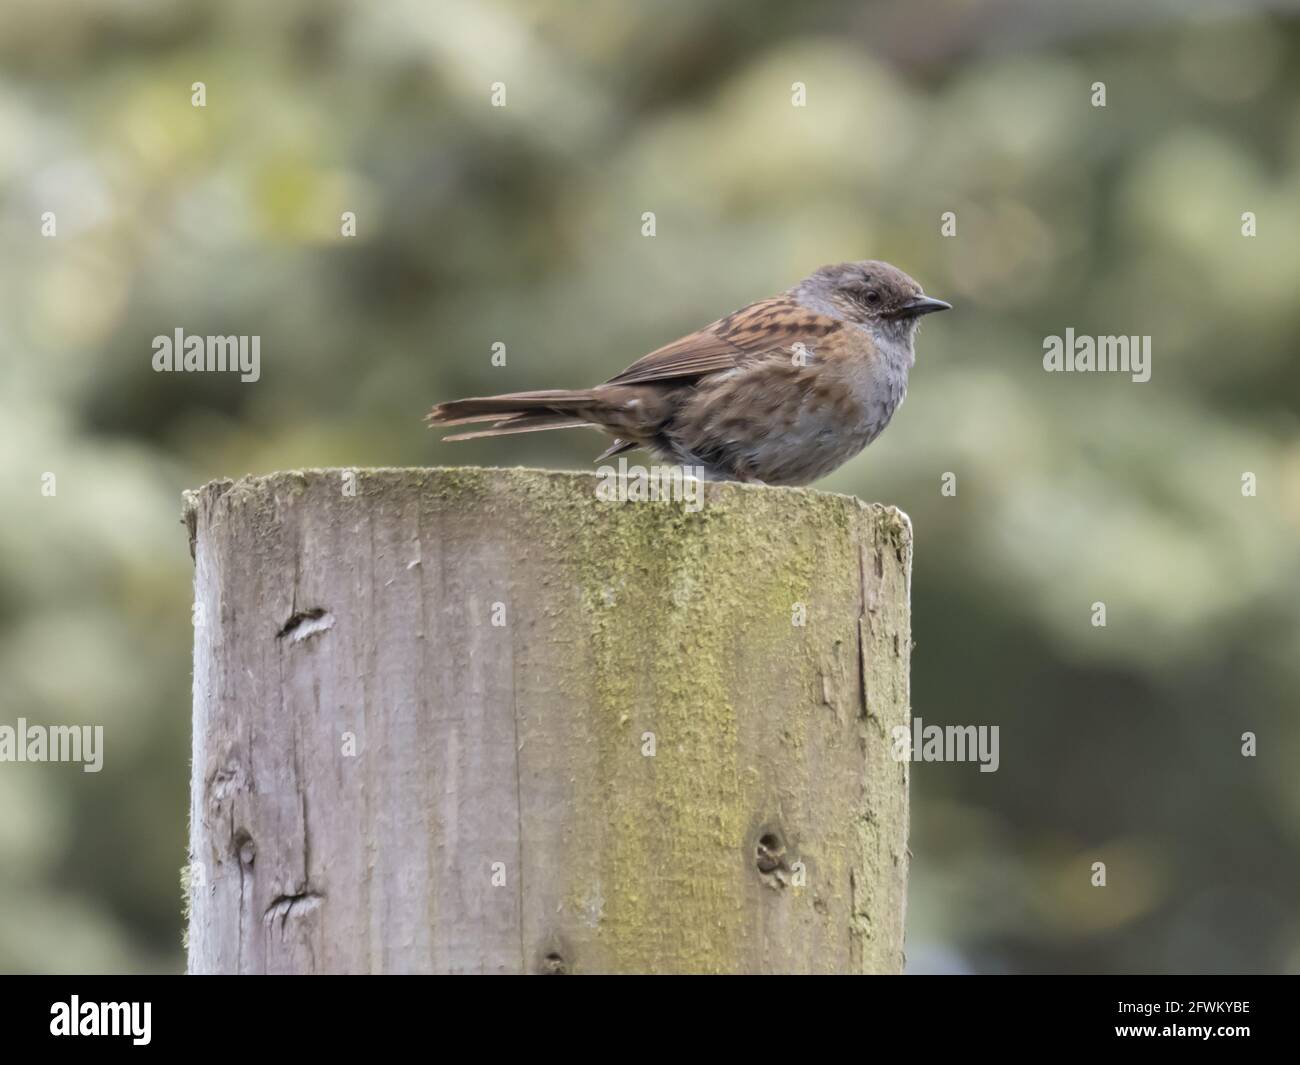 A Dunnock (Prunella modularis) also known as Hedge Accentor, Hedge Sparrow, or Hedge Warbler, sitting on top of a fence post. Stock Photo